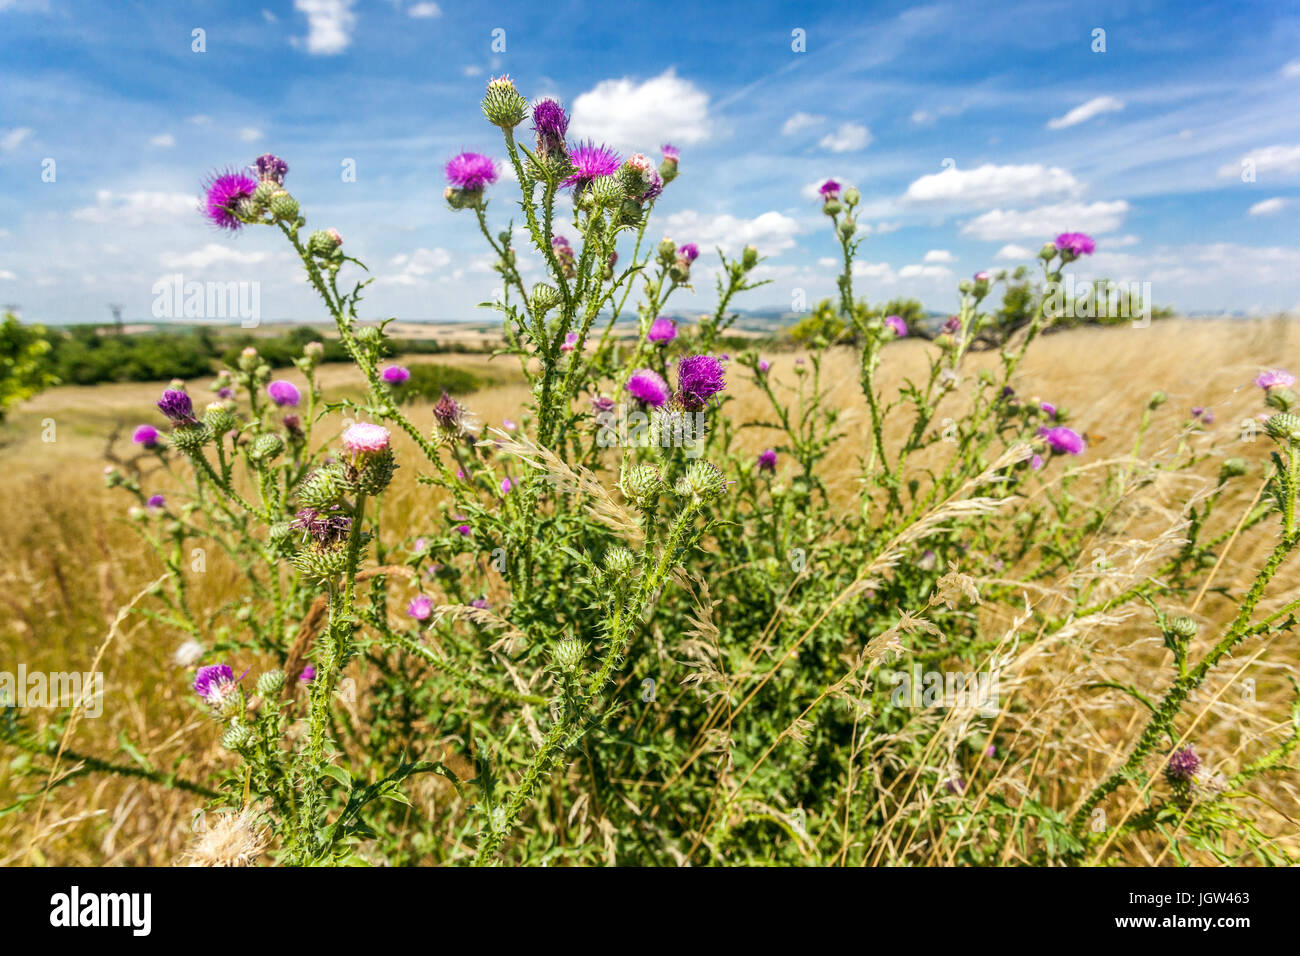 Spiny Plumeless thistle Welted Thistle Carduus acanthoides Wildflowers Meadow Nobody Flowering Wildflower Carduus Flowers Landscape July Summer Scene Stock Photo